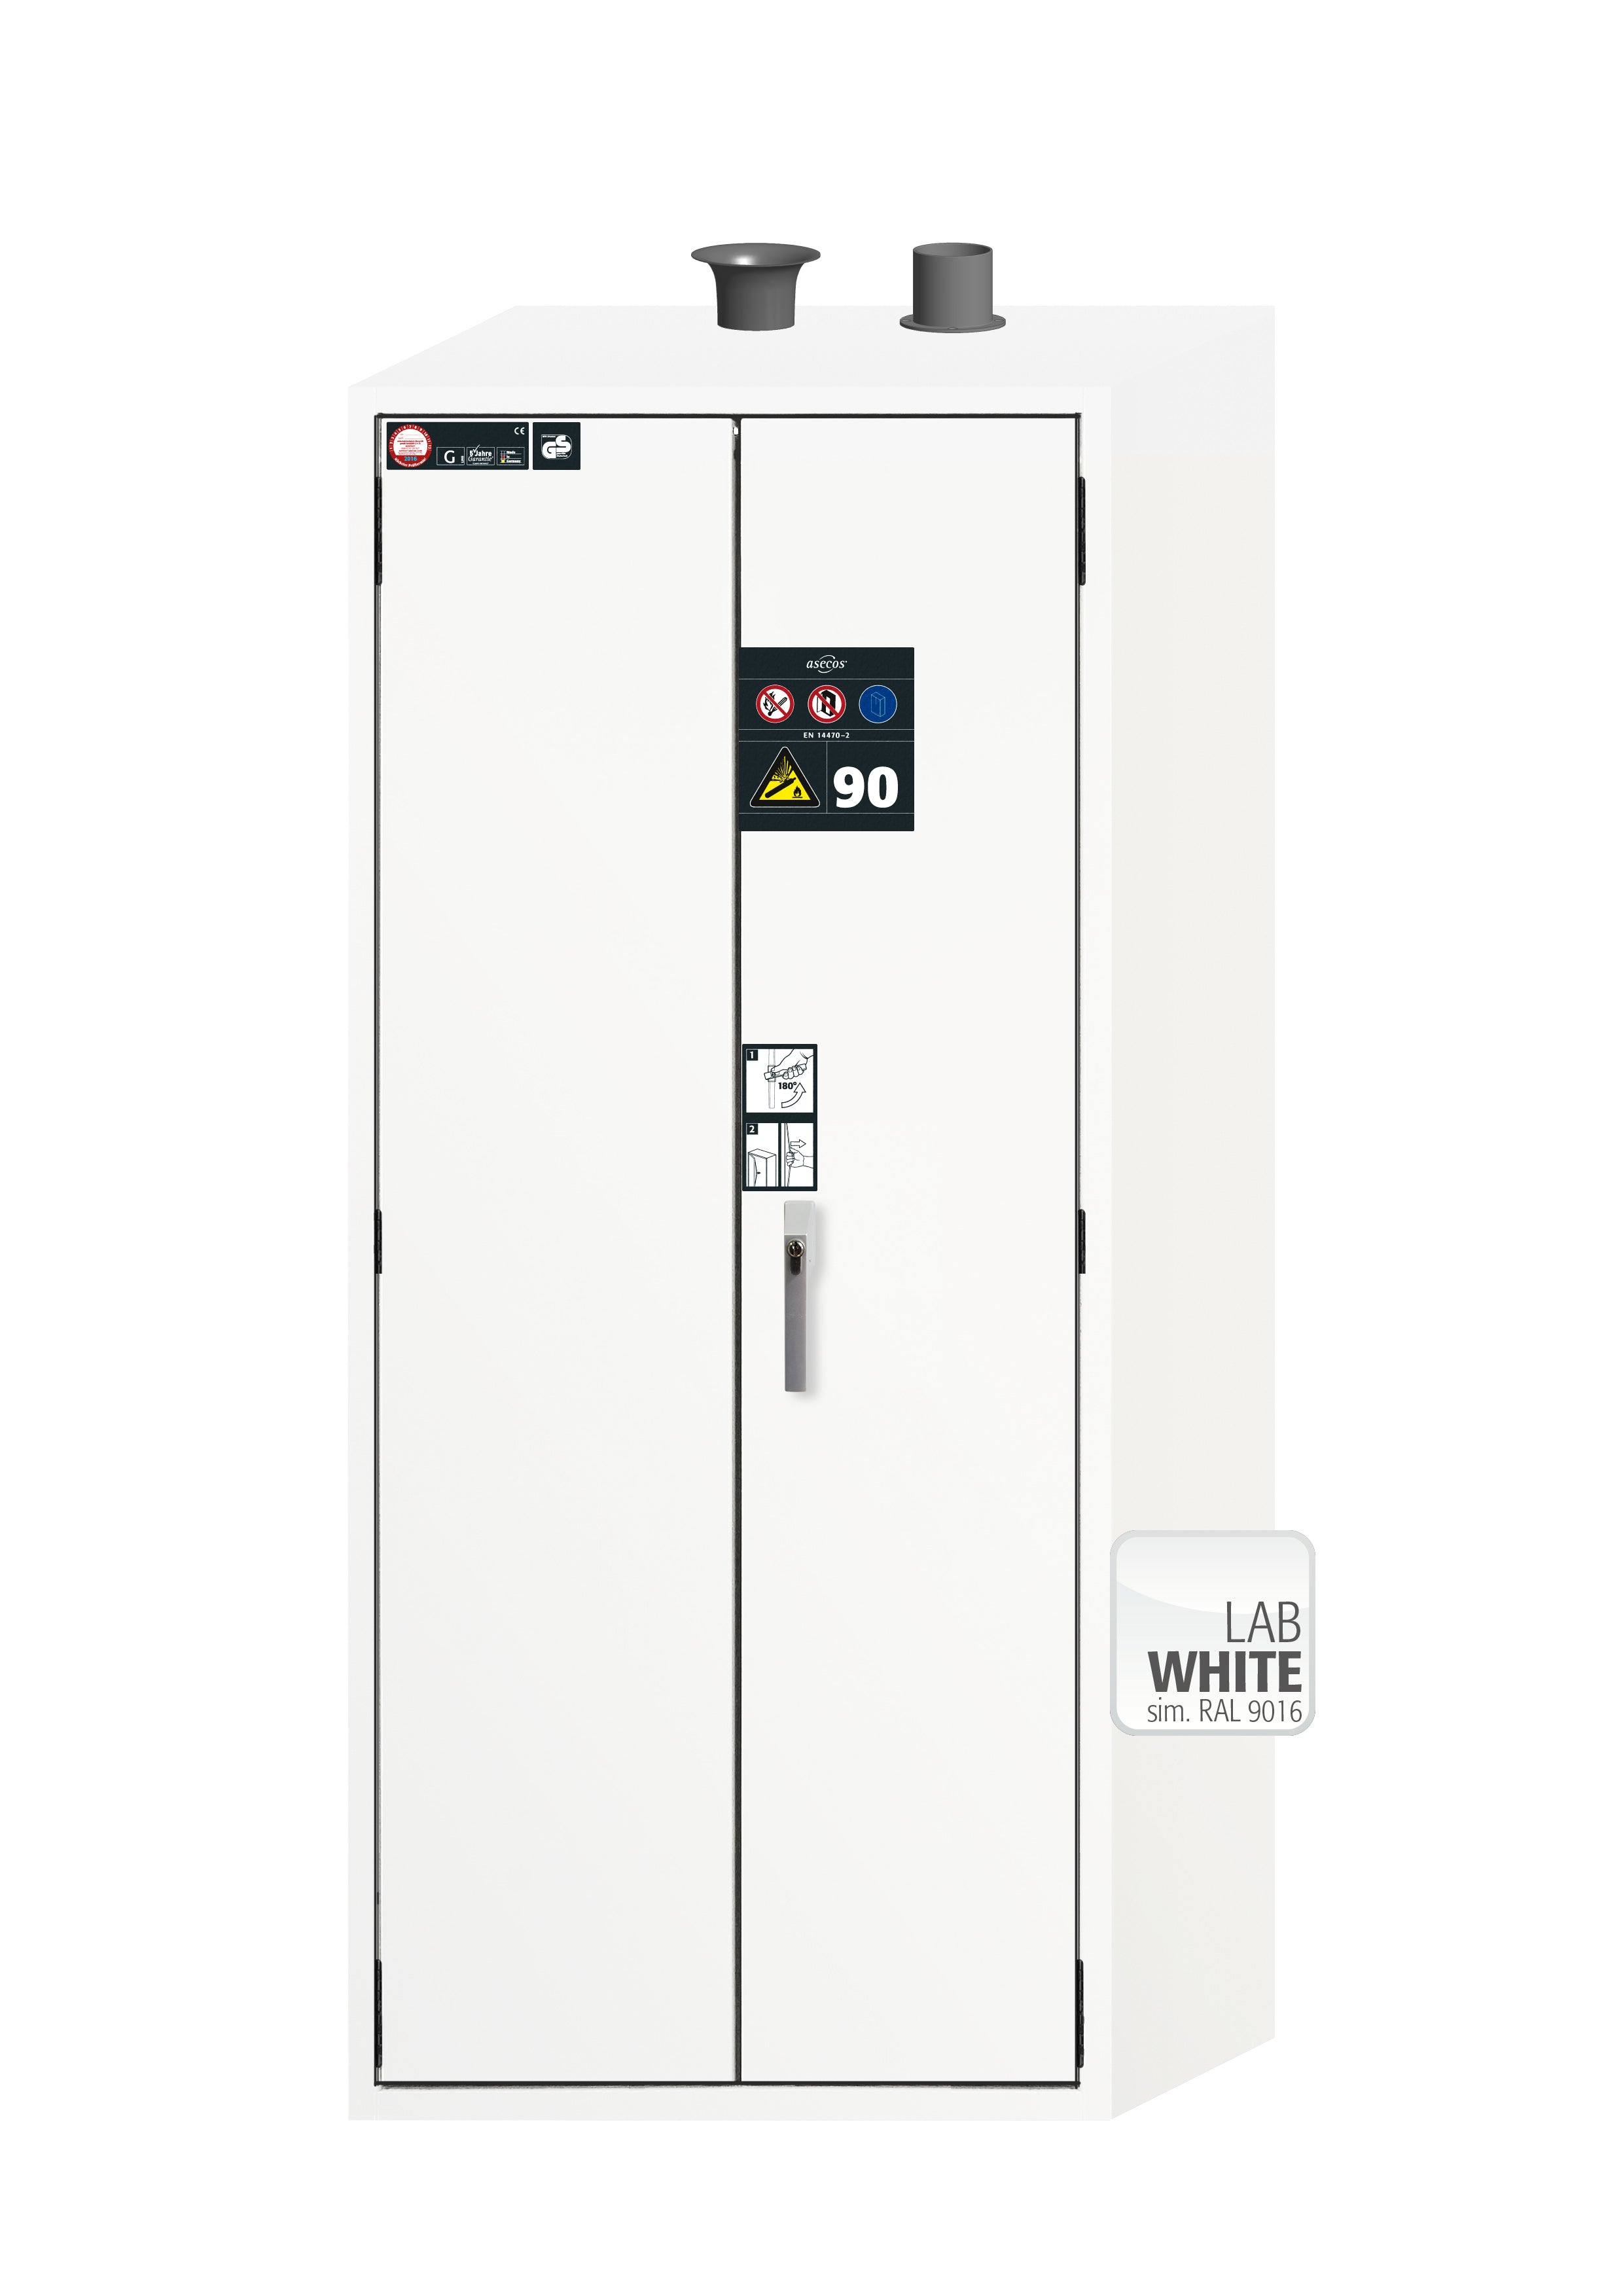 Type 90 compressed gas bottle cabinet G-ULTIMATE-90 model G90.205.090 in laboratory white (similar to RAL 9016) with for 3x compressed gas bottles of 50 liters each